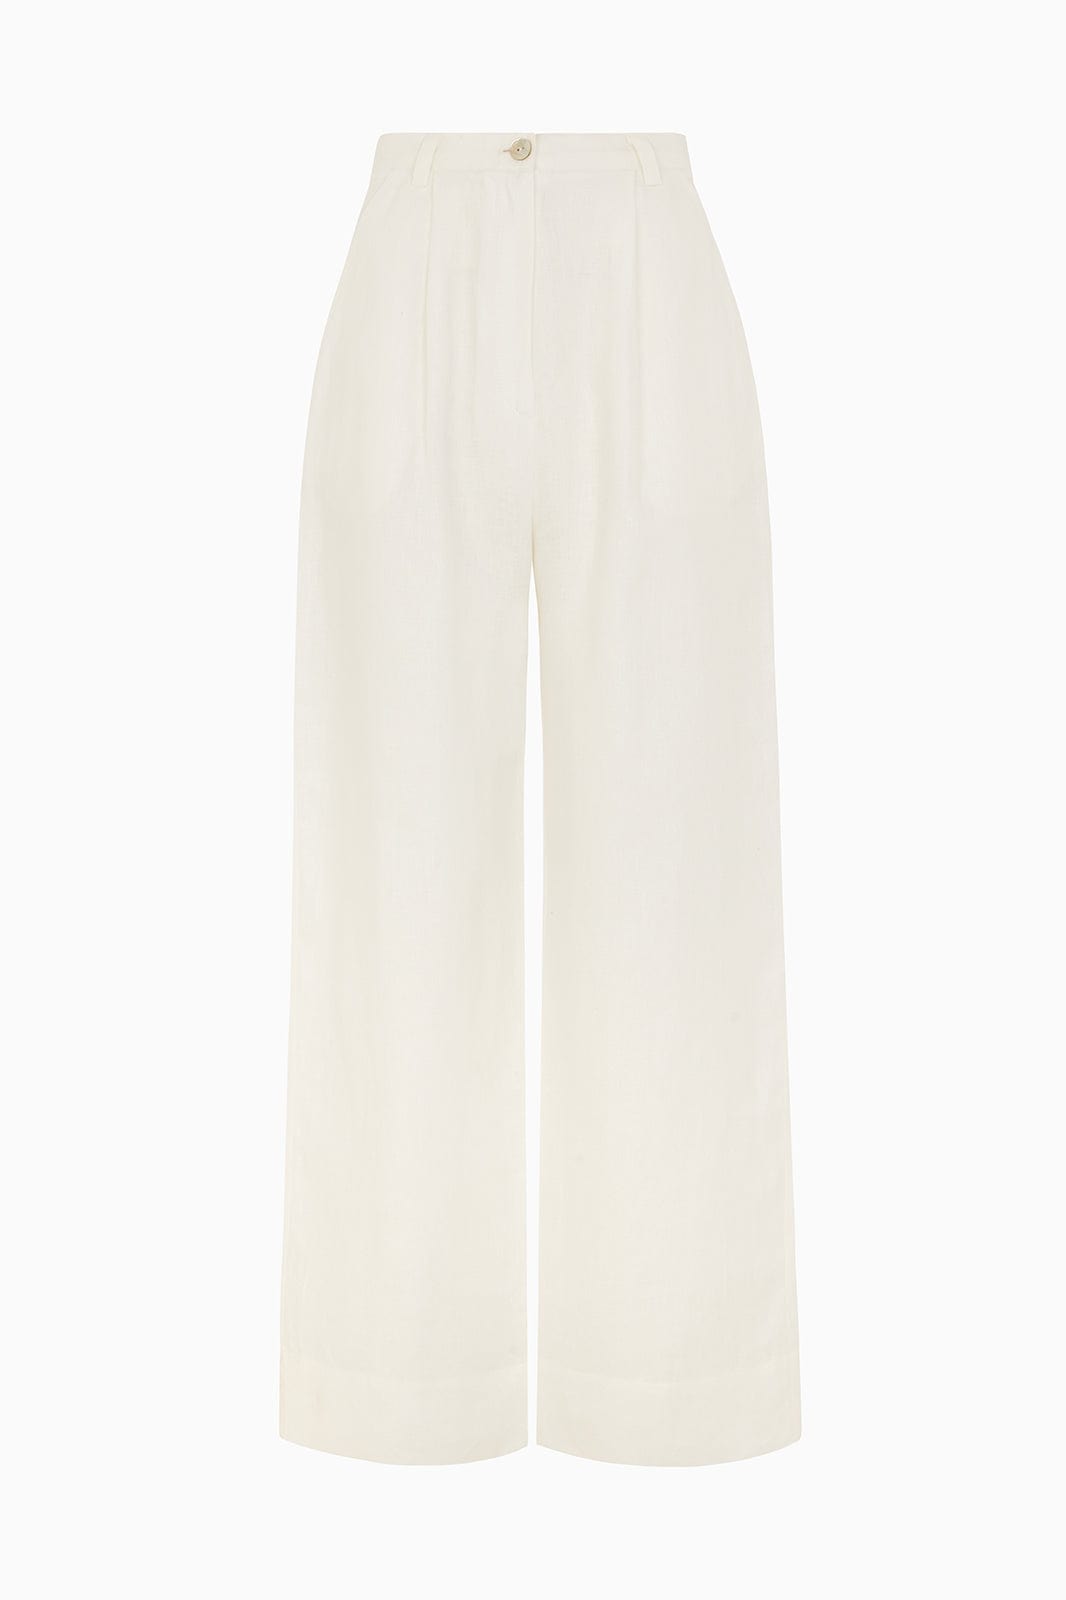 arkitaip Trousers The Wabi Pleated Linen Trousers in off-white